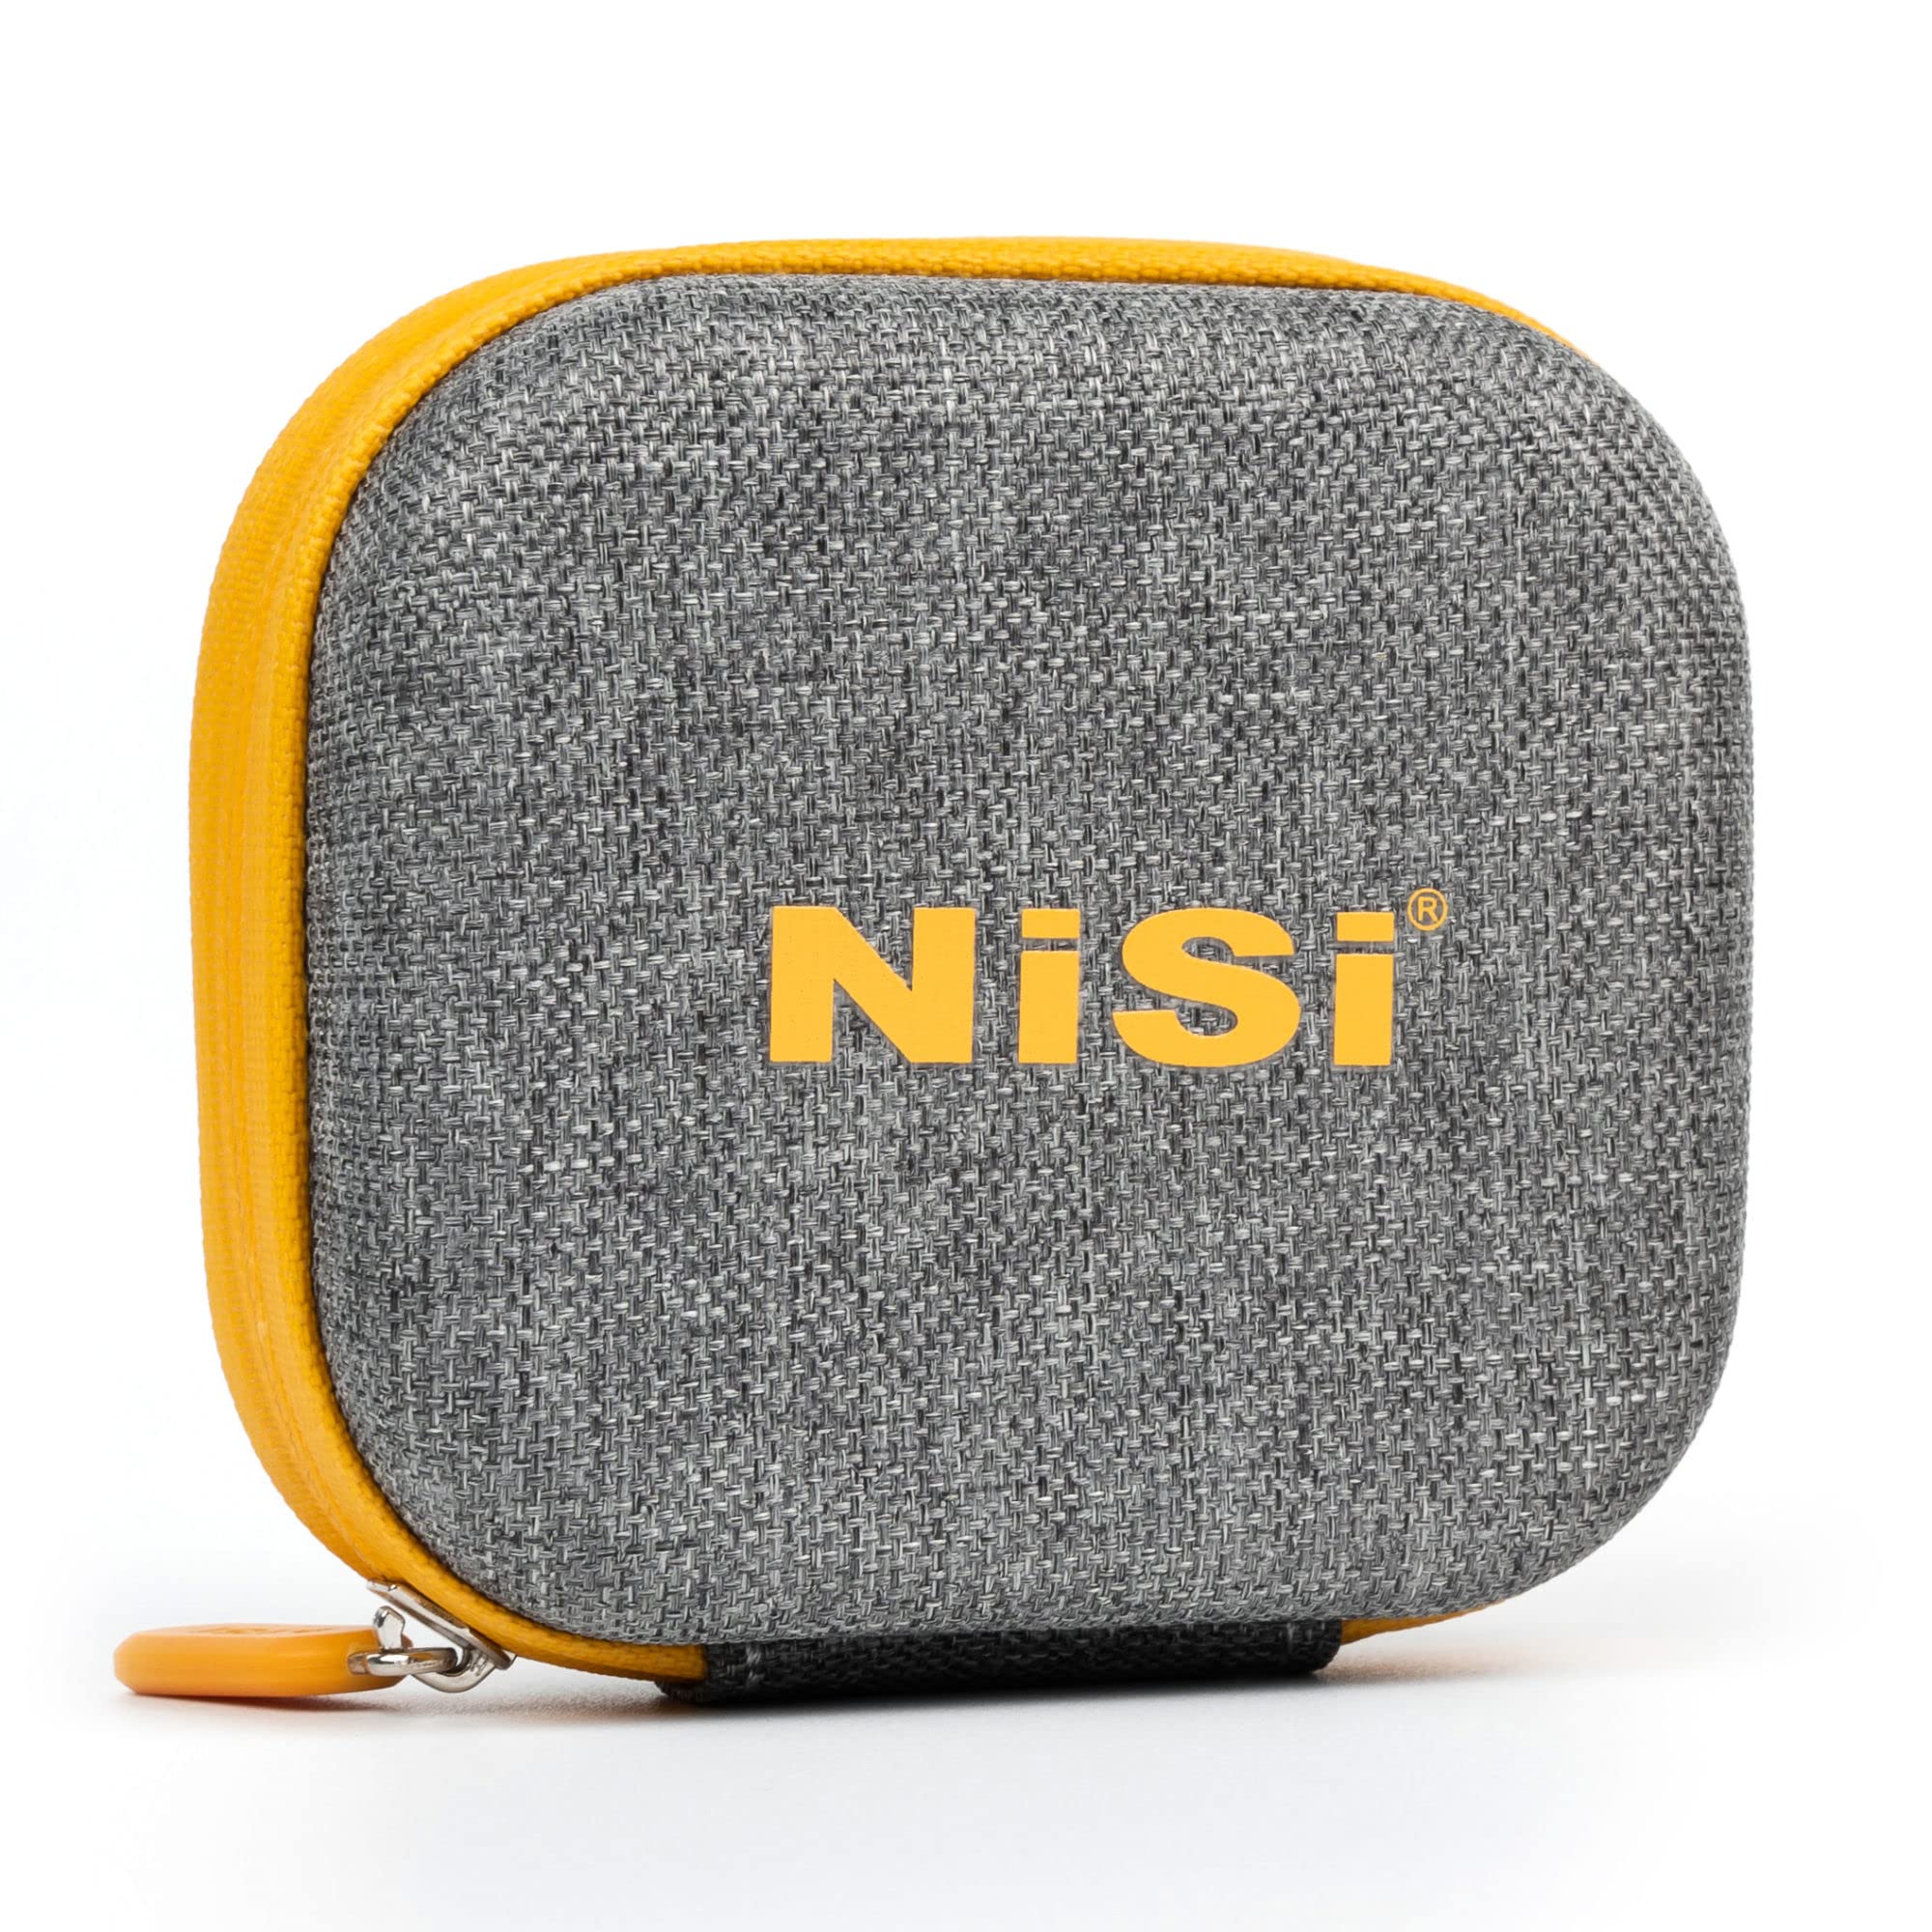 NiSi Small Circular Filter Caddy | 6-Pocket Filters Holder Case for Circular UV, Neutral-Density, and Optical Lens Glass Filters Up to 62mm | Camera Filter Accessories and Storage